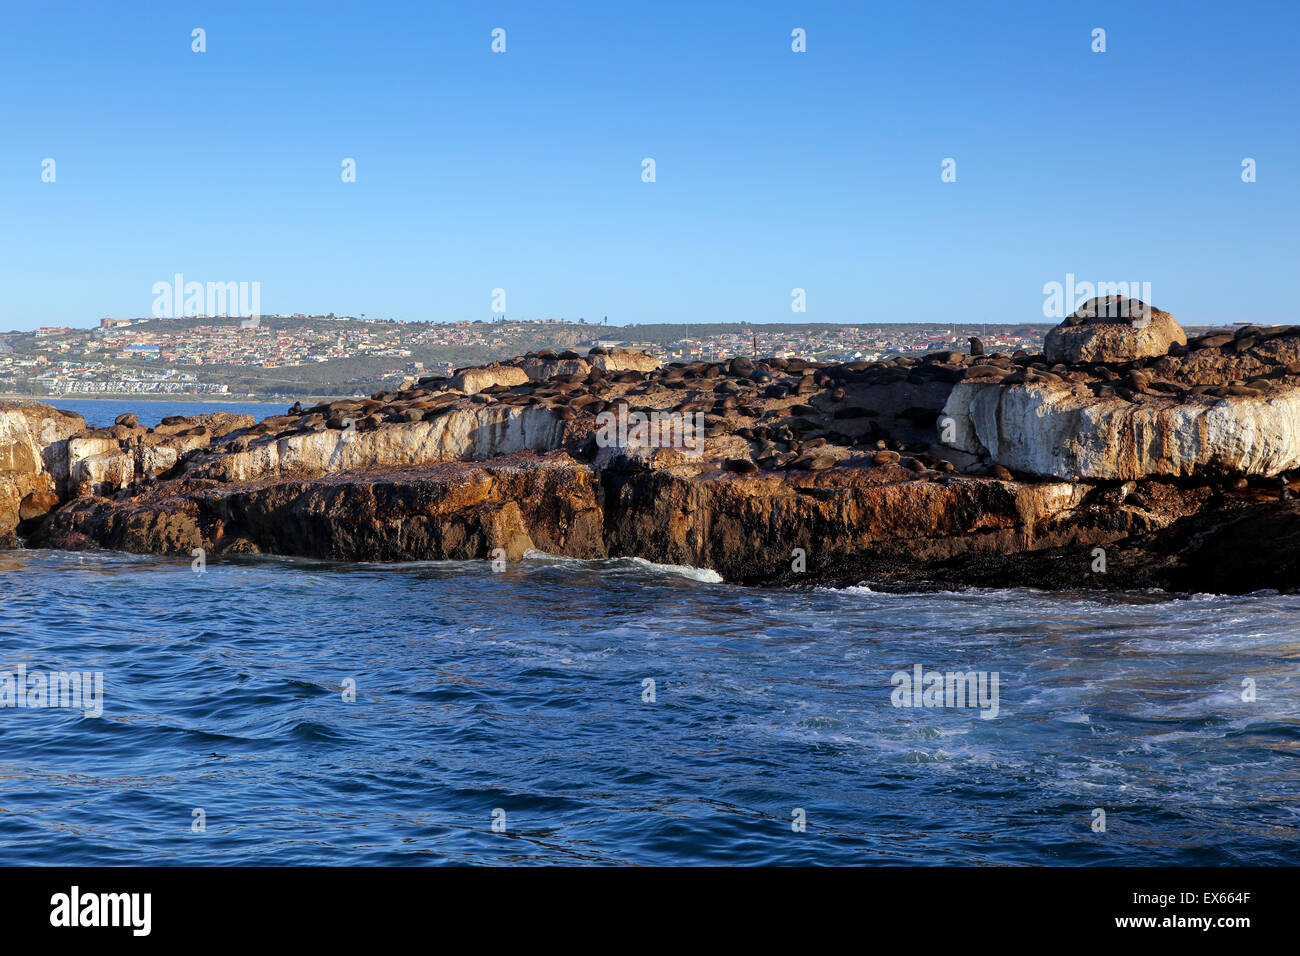 Seal Island in Mossel Bay, South Africa Stock Photo